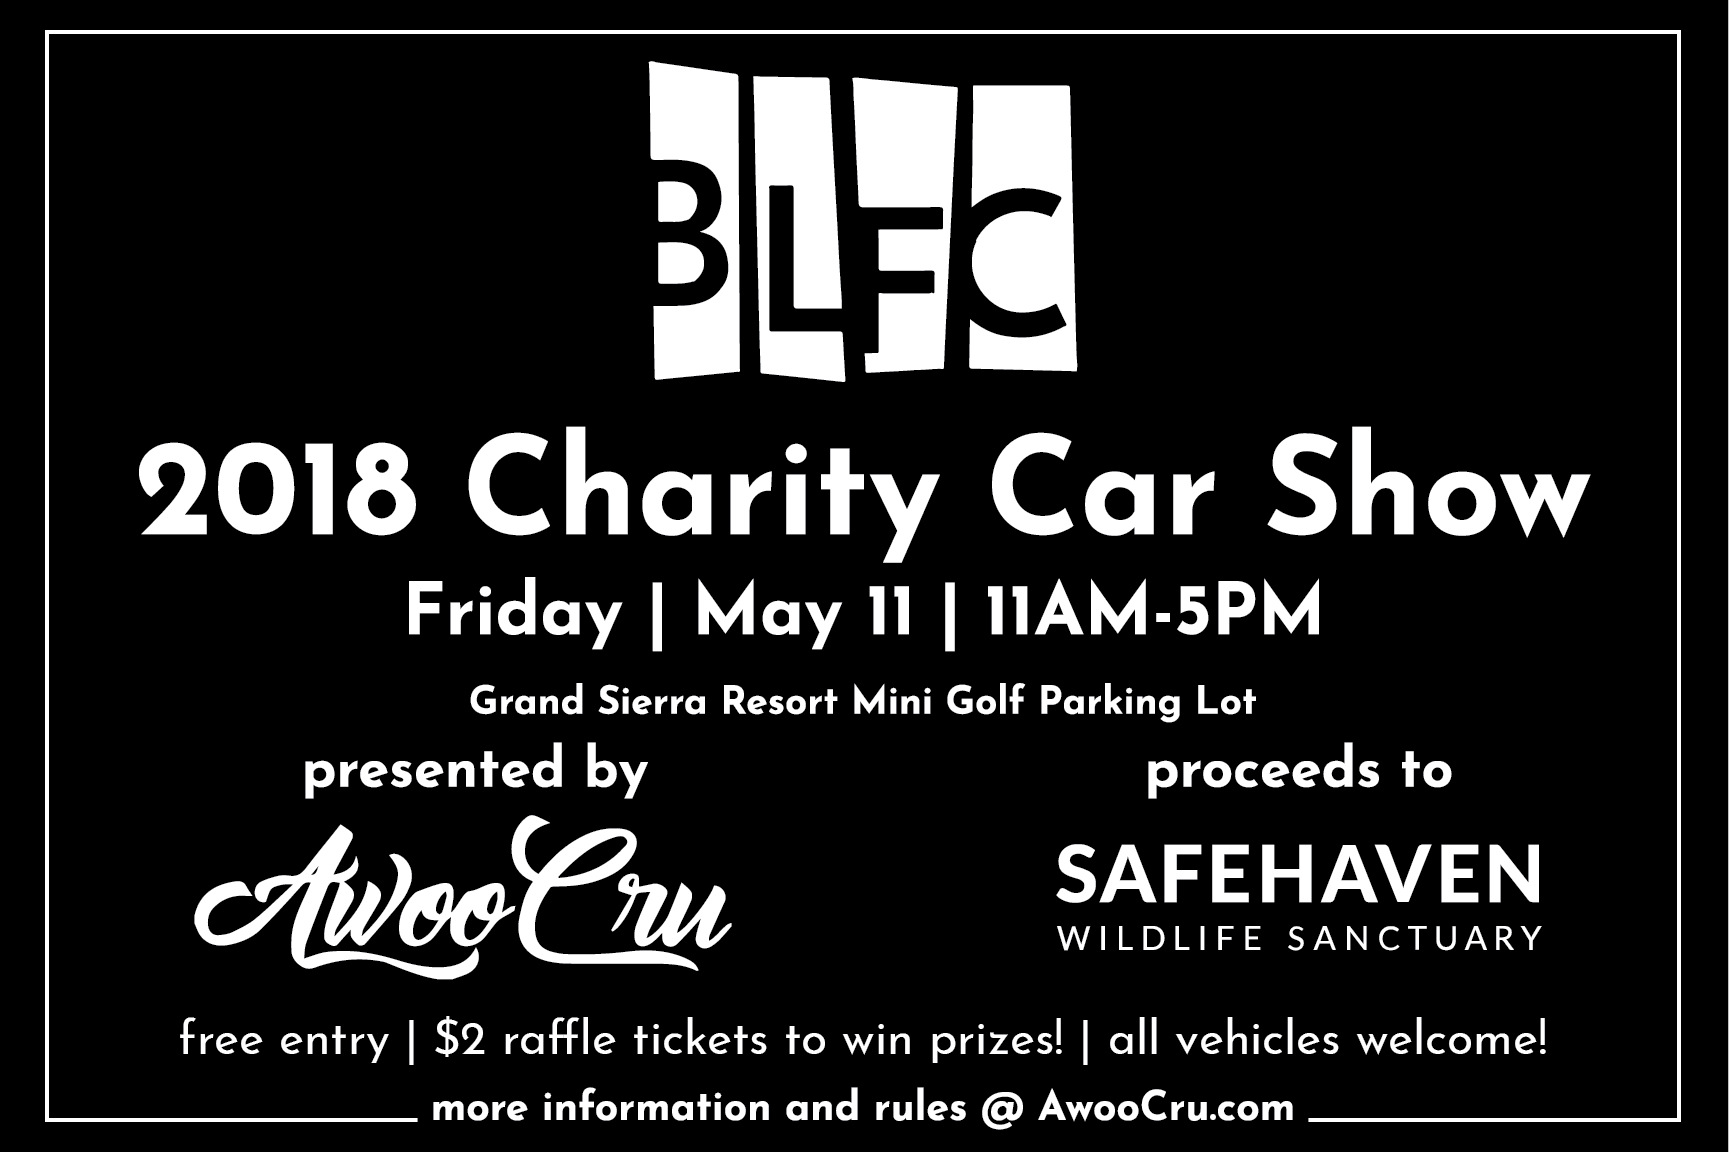 BLFC-AwooCru-Car-Show-Flyer-4x6.png